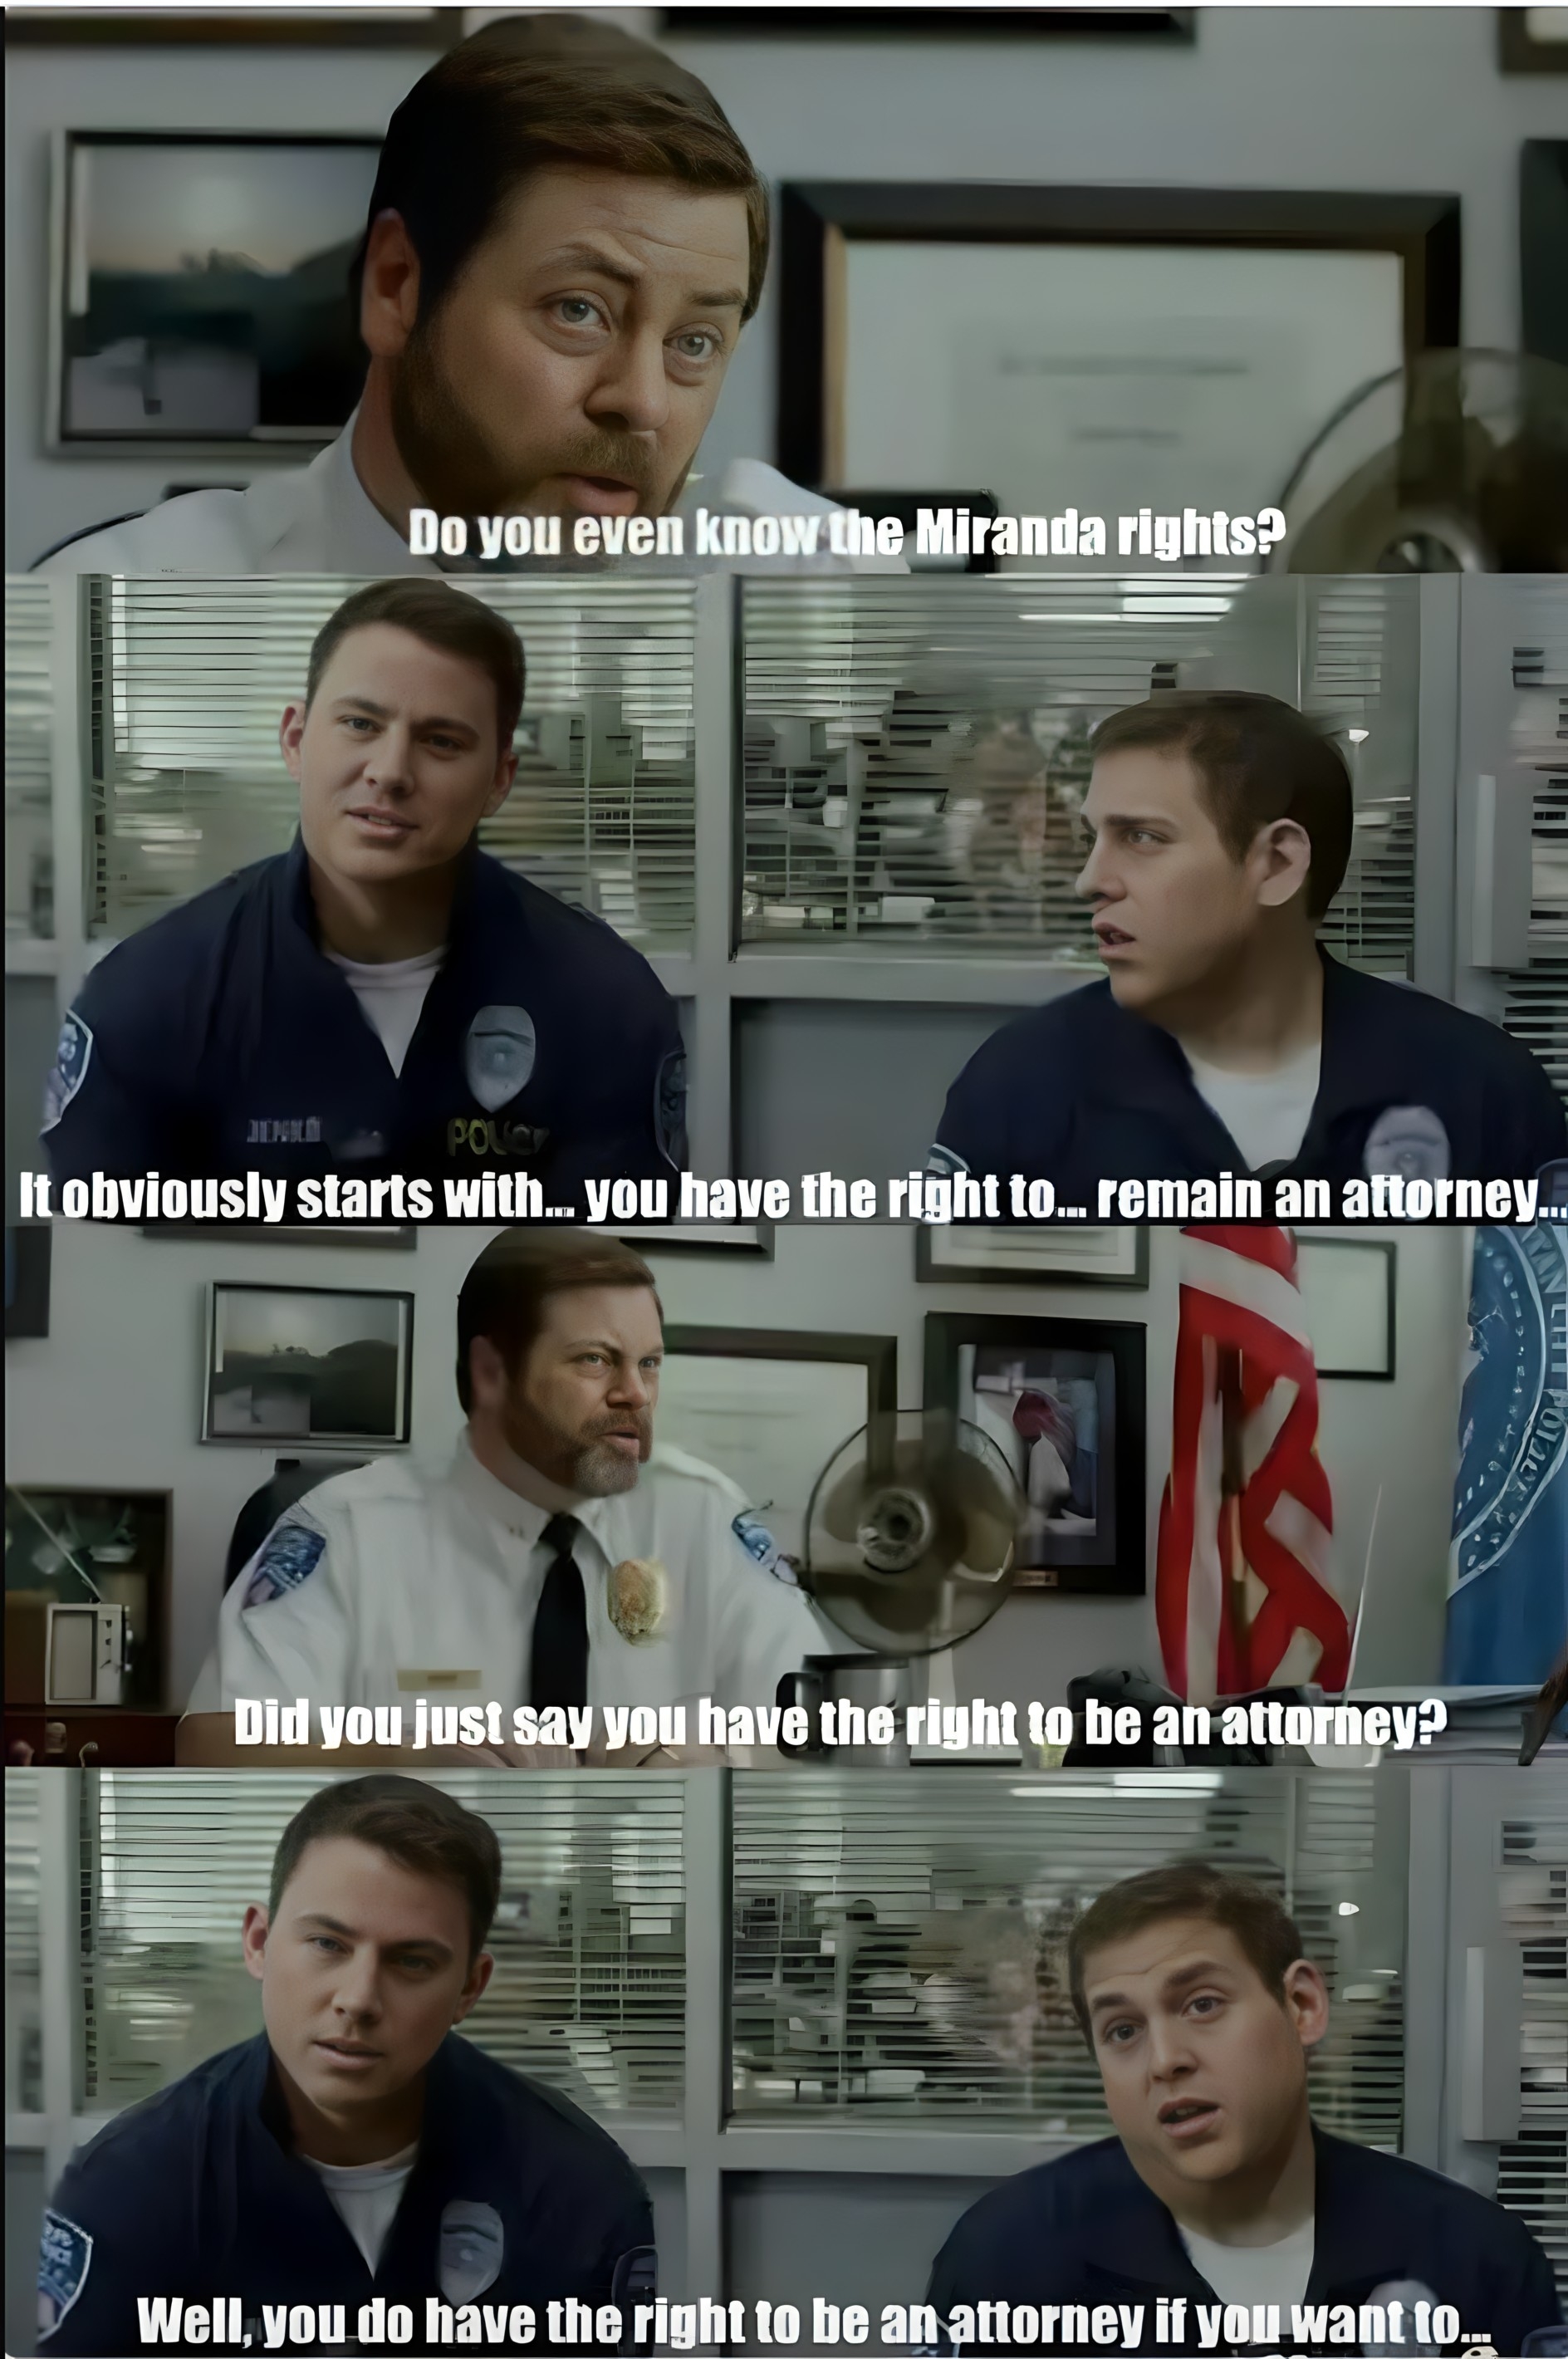 character asking cops if they even know the miranda rights